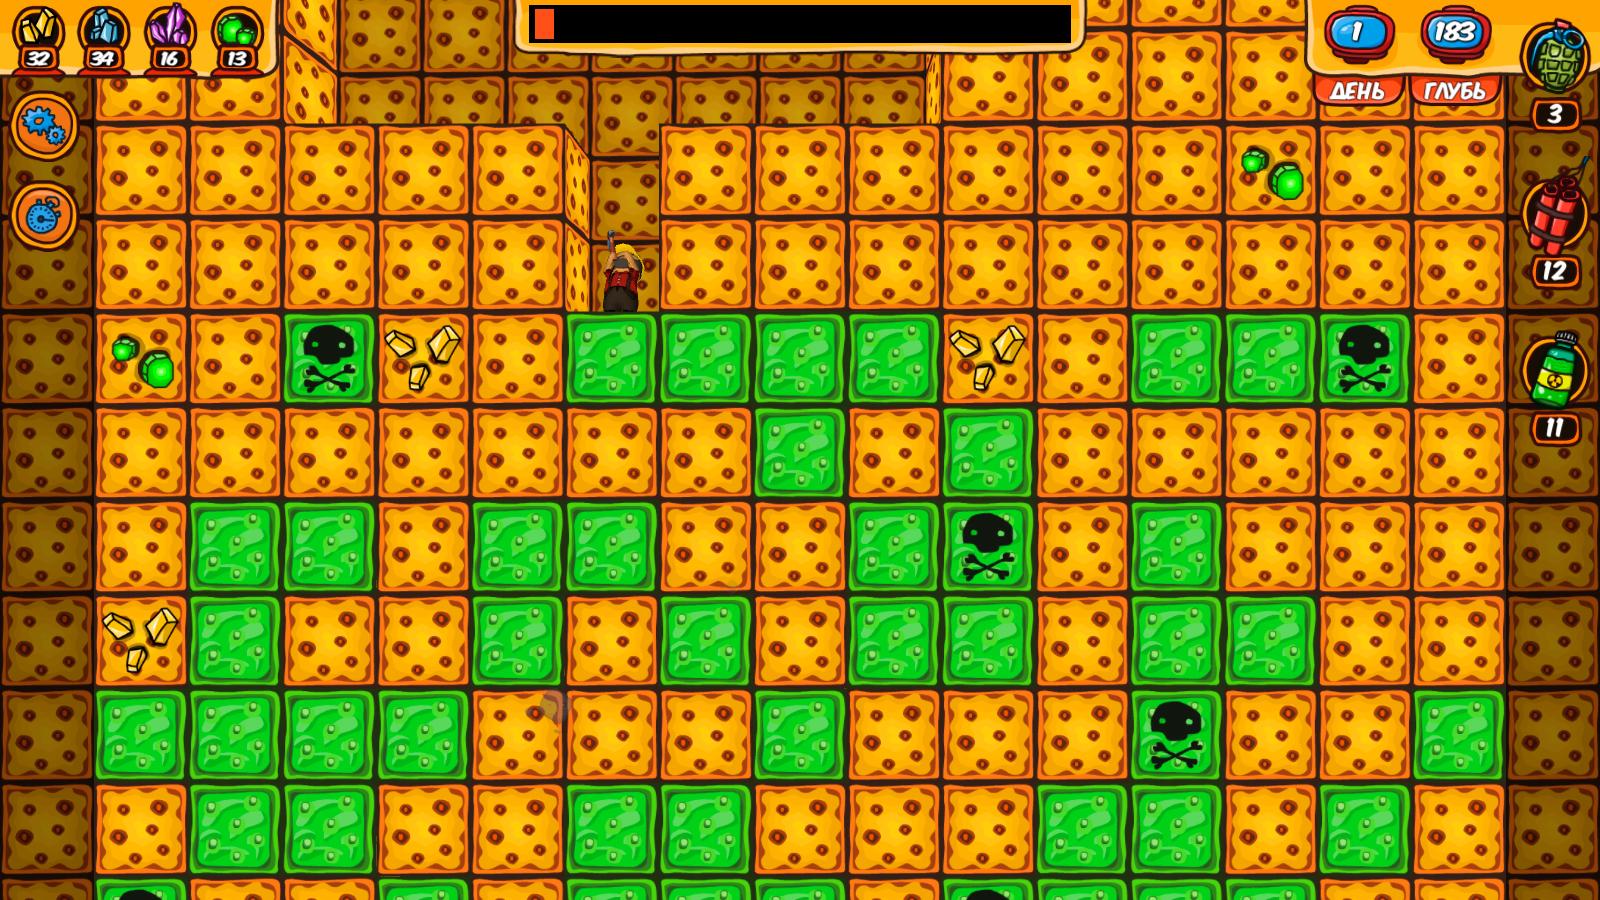 Screenshot №4 from game Mad Digger